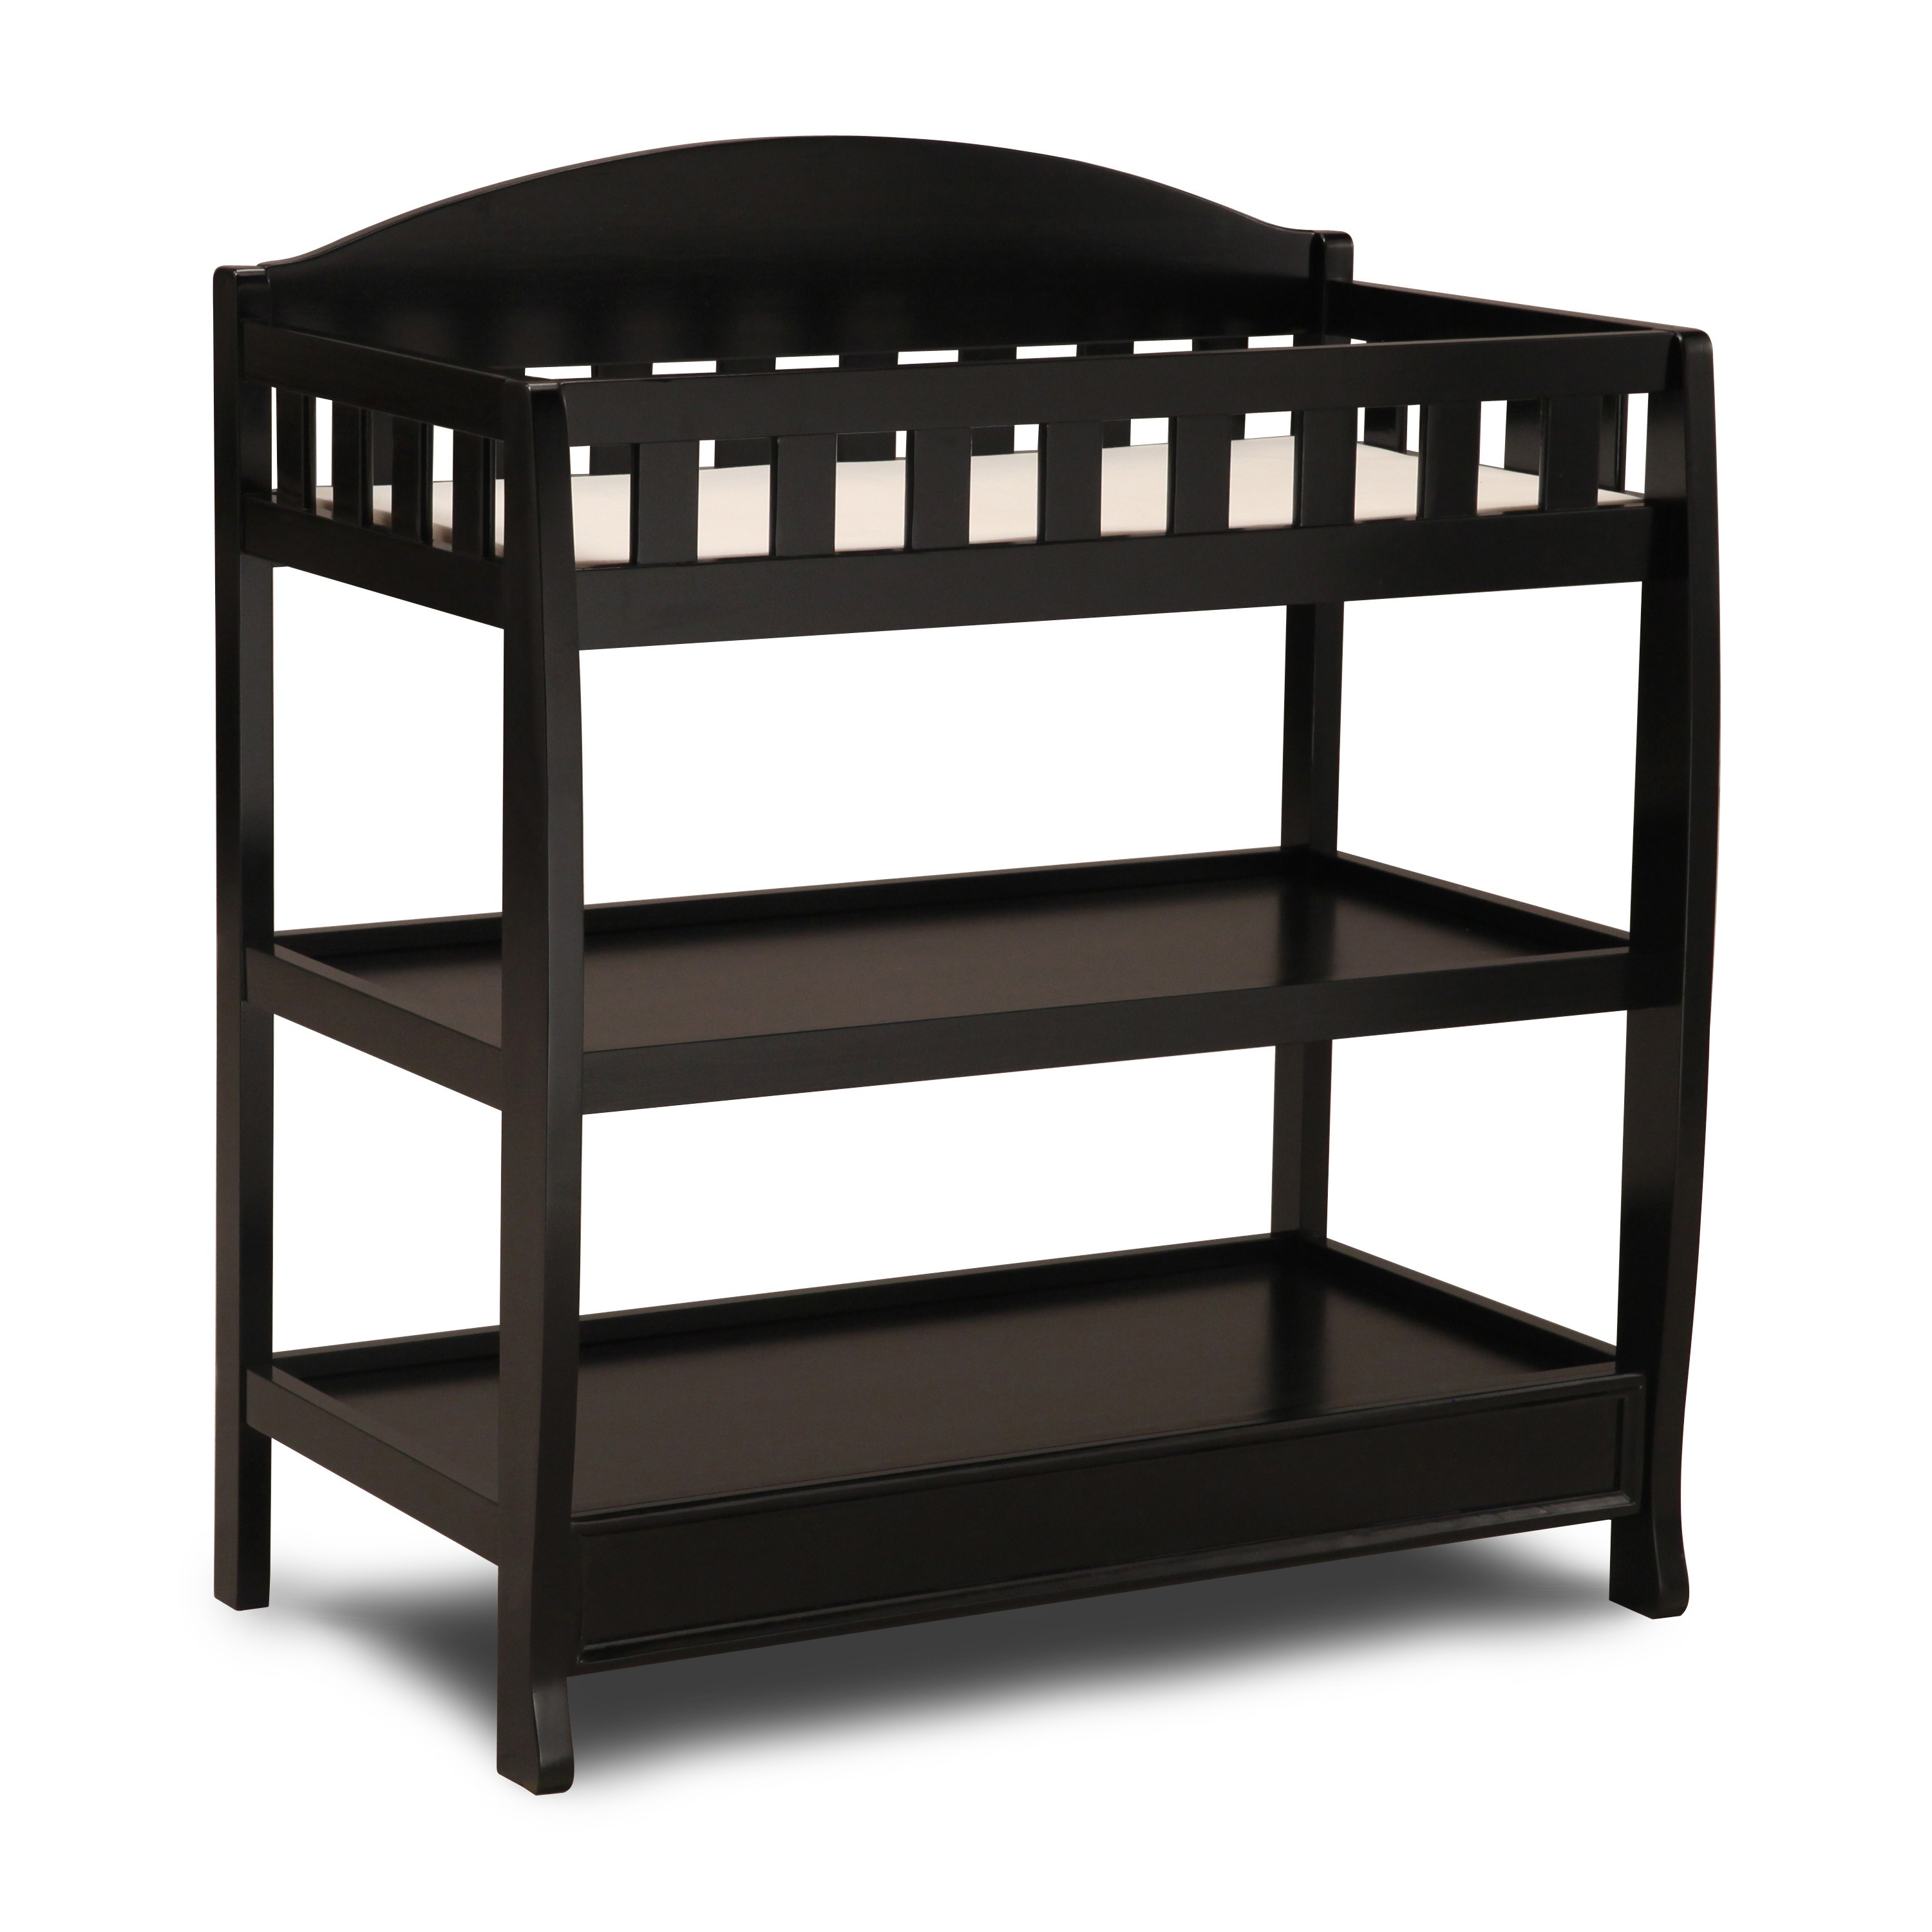 Delta Children Wilmington Changing Table with Pad, Ebony Black - image 1 of 8